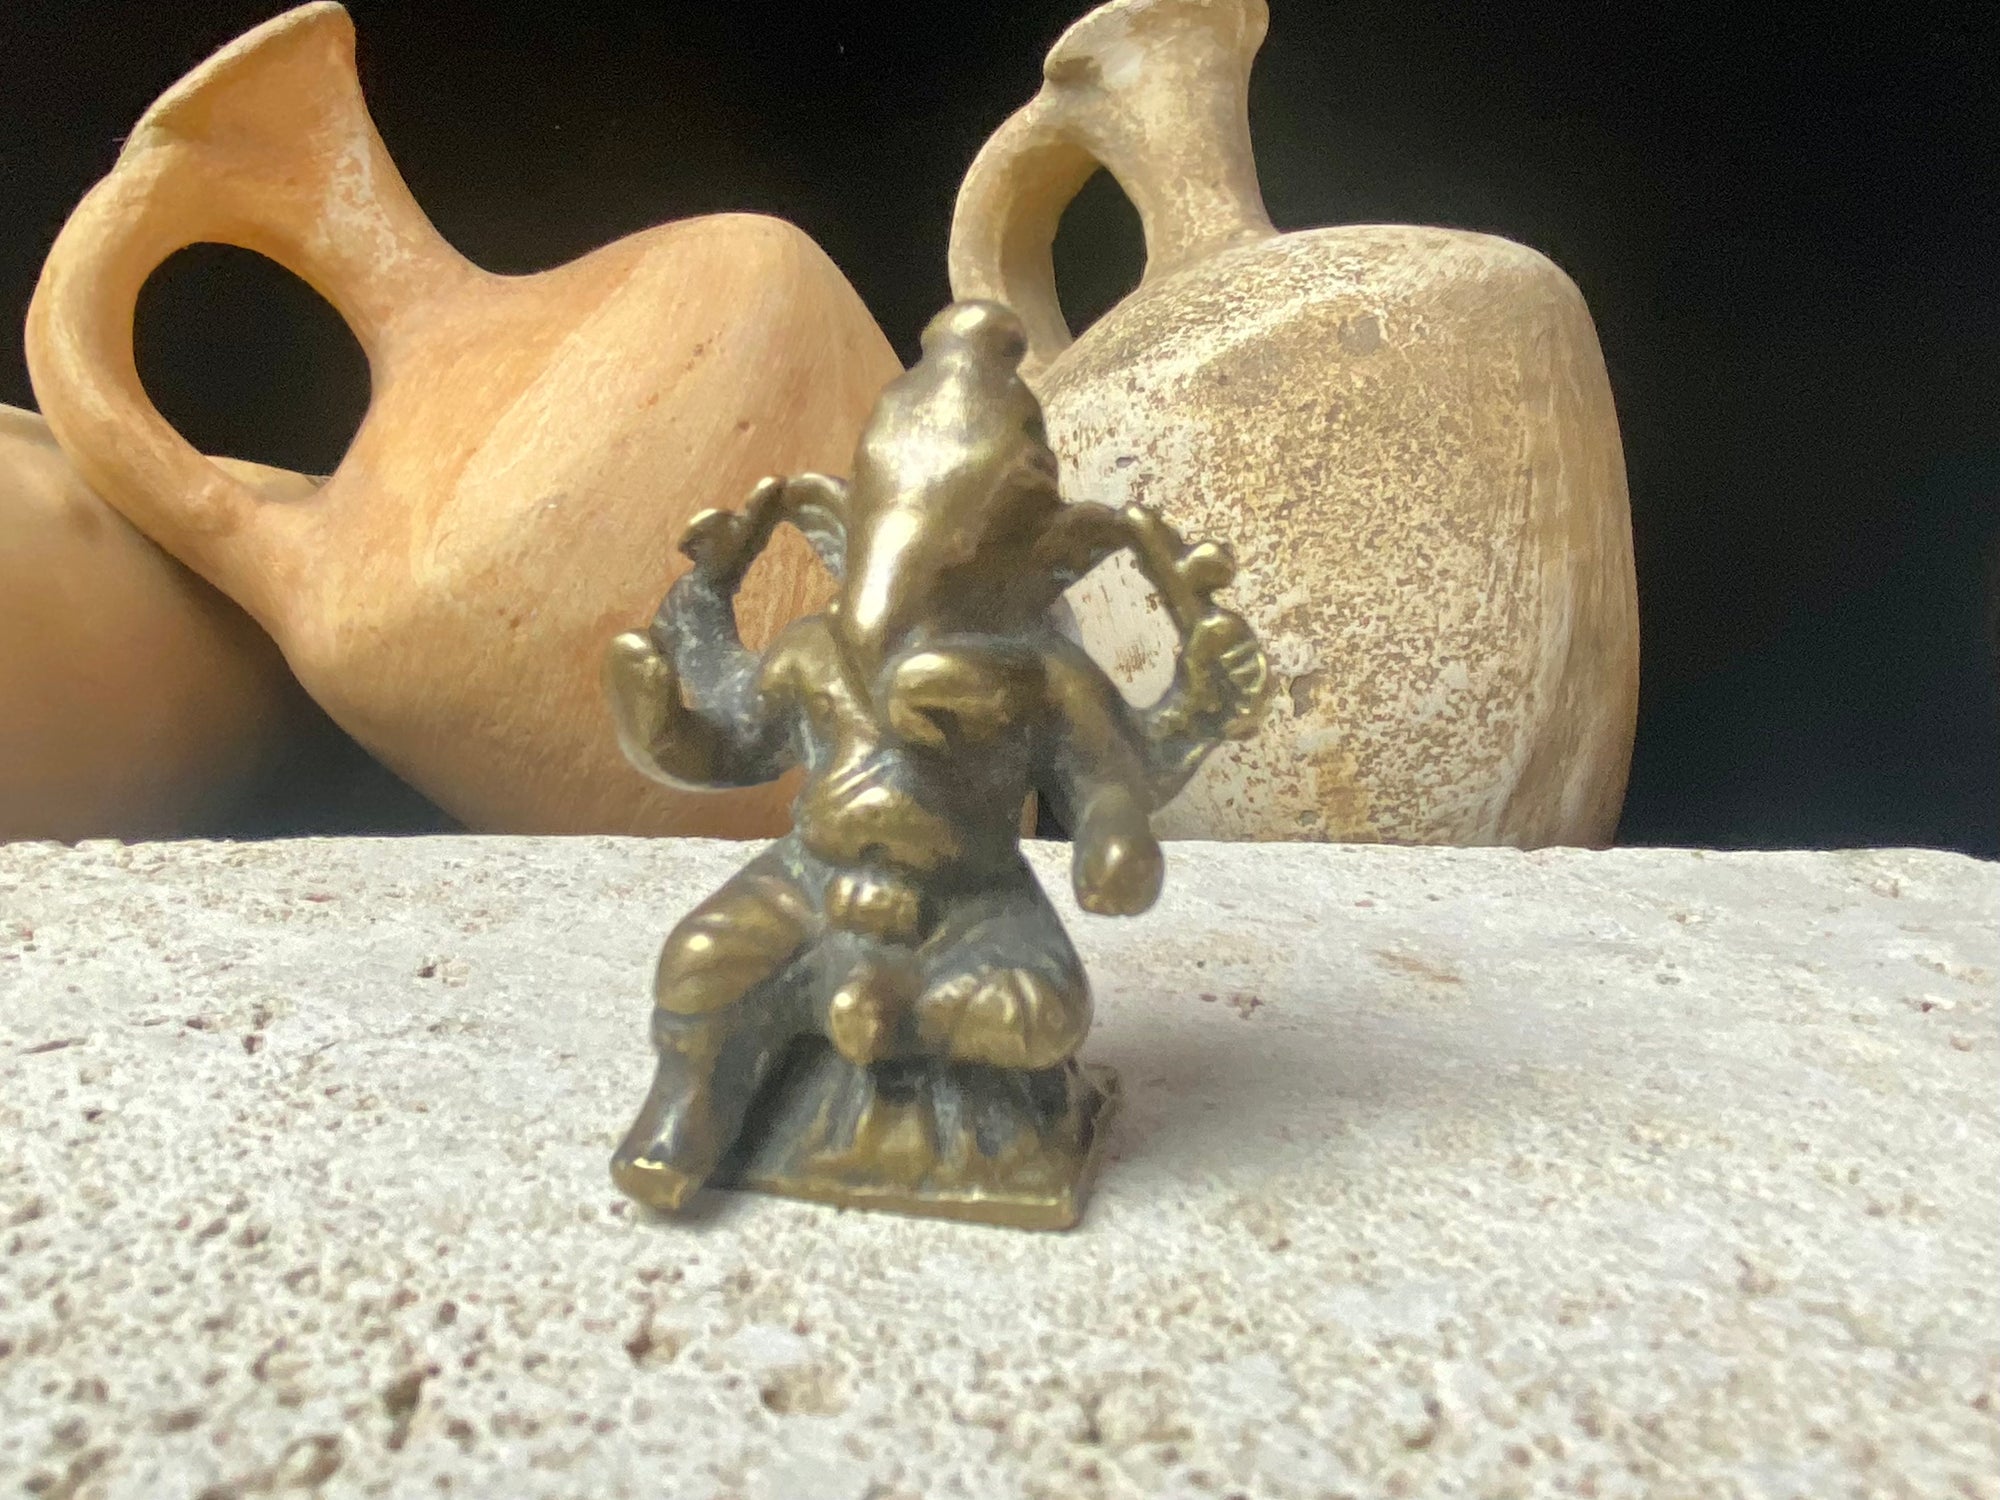 This exquisite mini Ganesh statue features fine, elegant features, and a face softened by many years of rubbing and worship. A beautiful piece. Approximately 100 years old, early 20th century, India, brass alloy.  Measurements: height 6.5 cm, width 3.2 cm, depth 2.5 cm